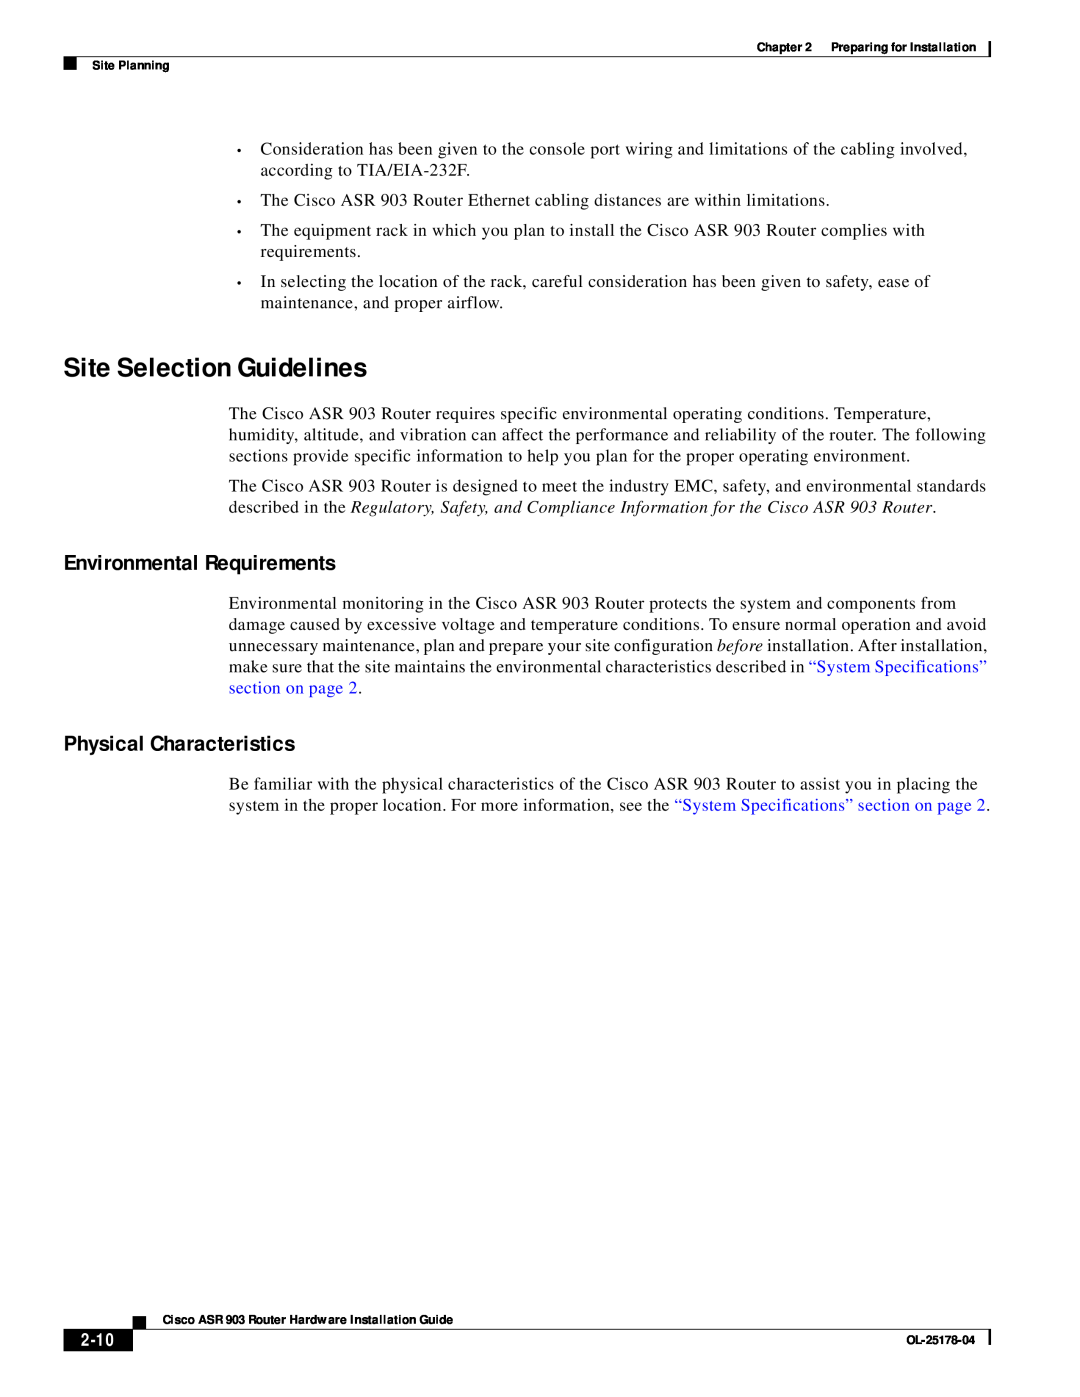 Cisco Systems ASR 903 manual Site Selection Guidelines, Environmental Requirements, Physical Characteristics, 2-10 